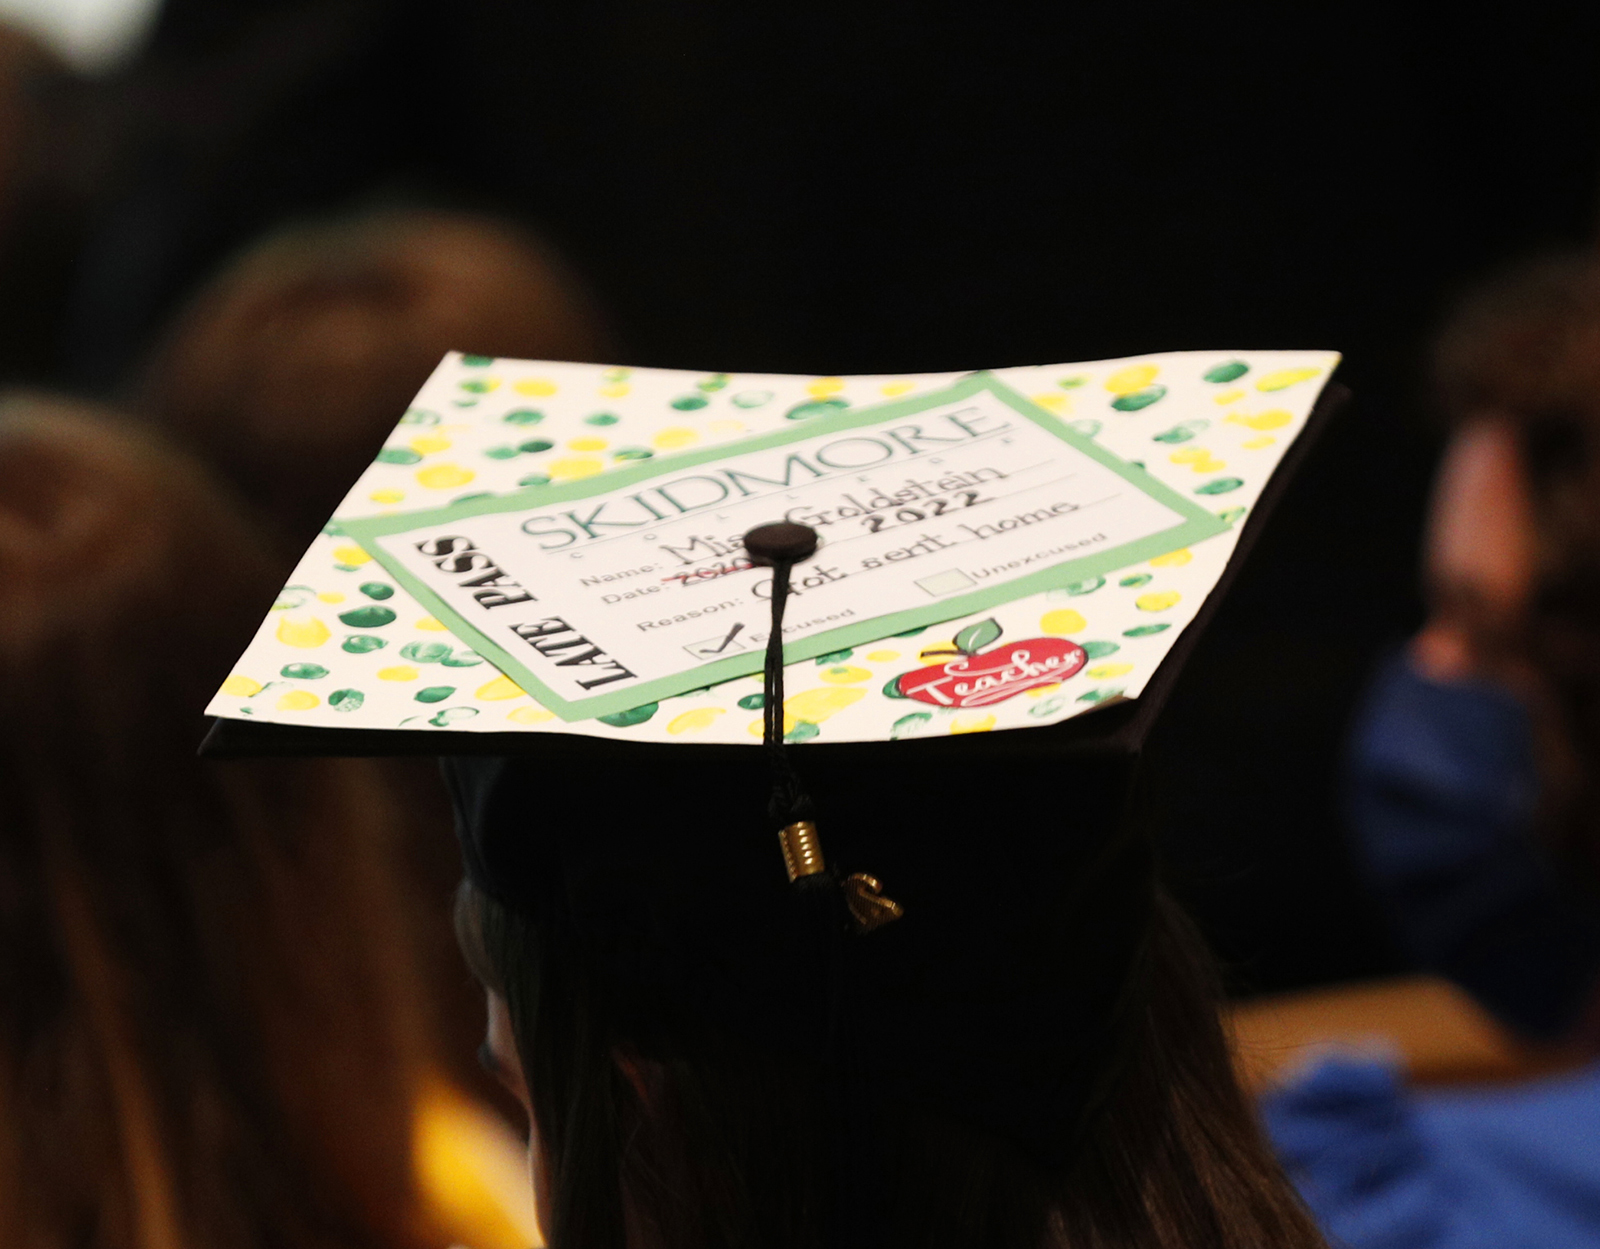 Skidmore College 111th Commencement Exercises for the Class of 2022